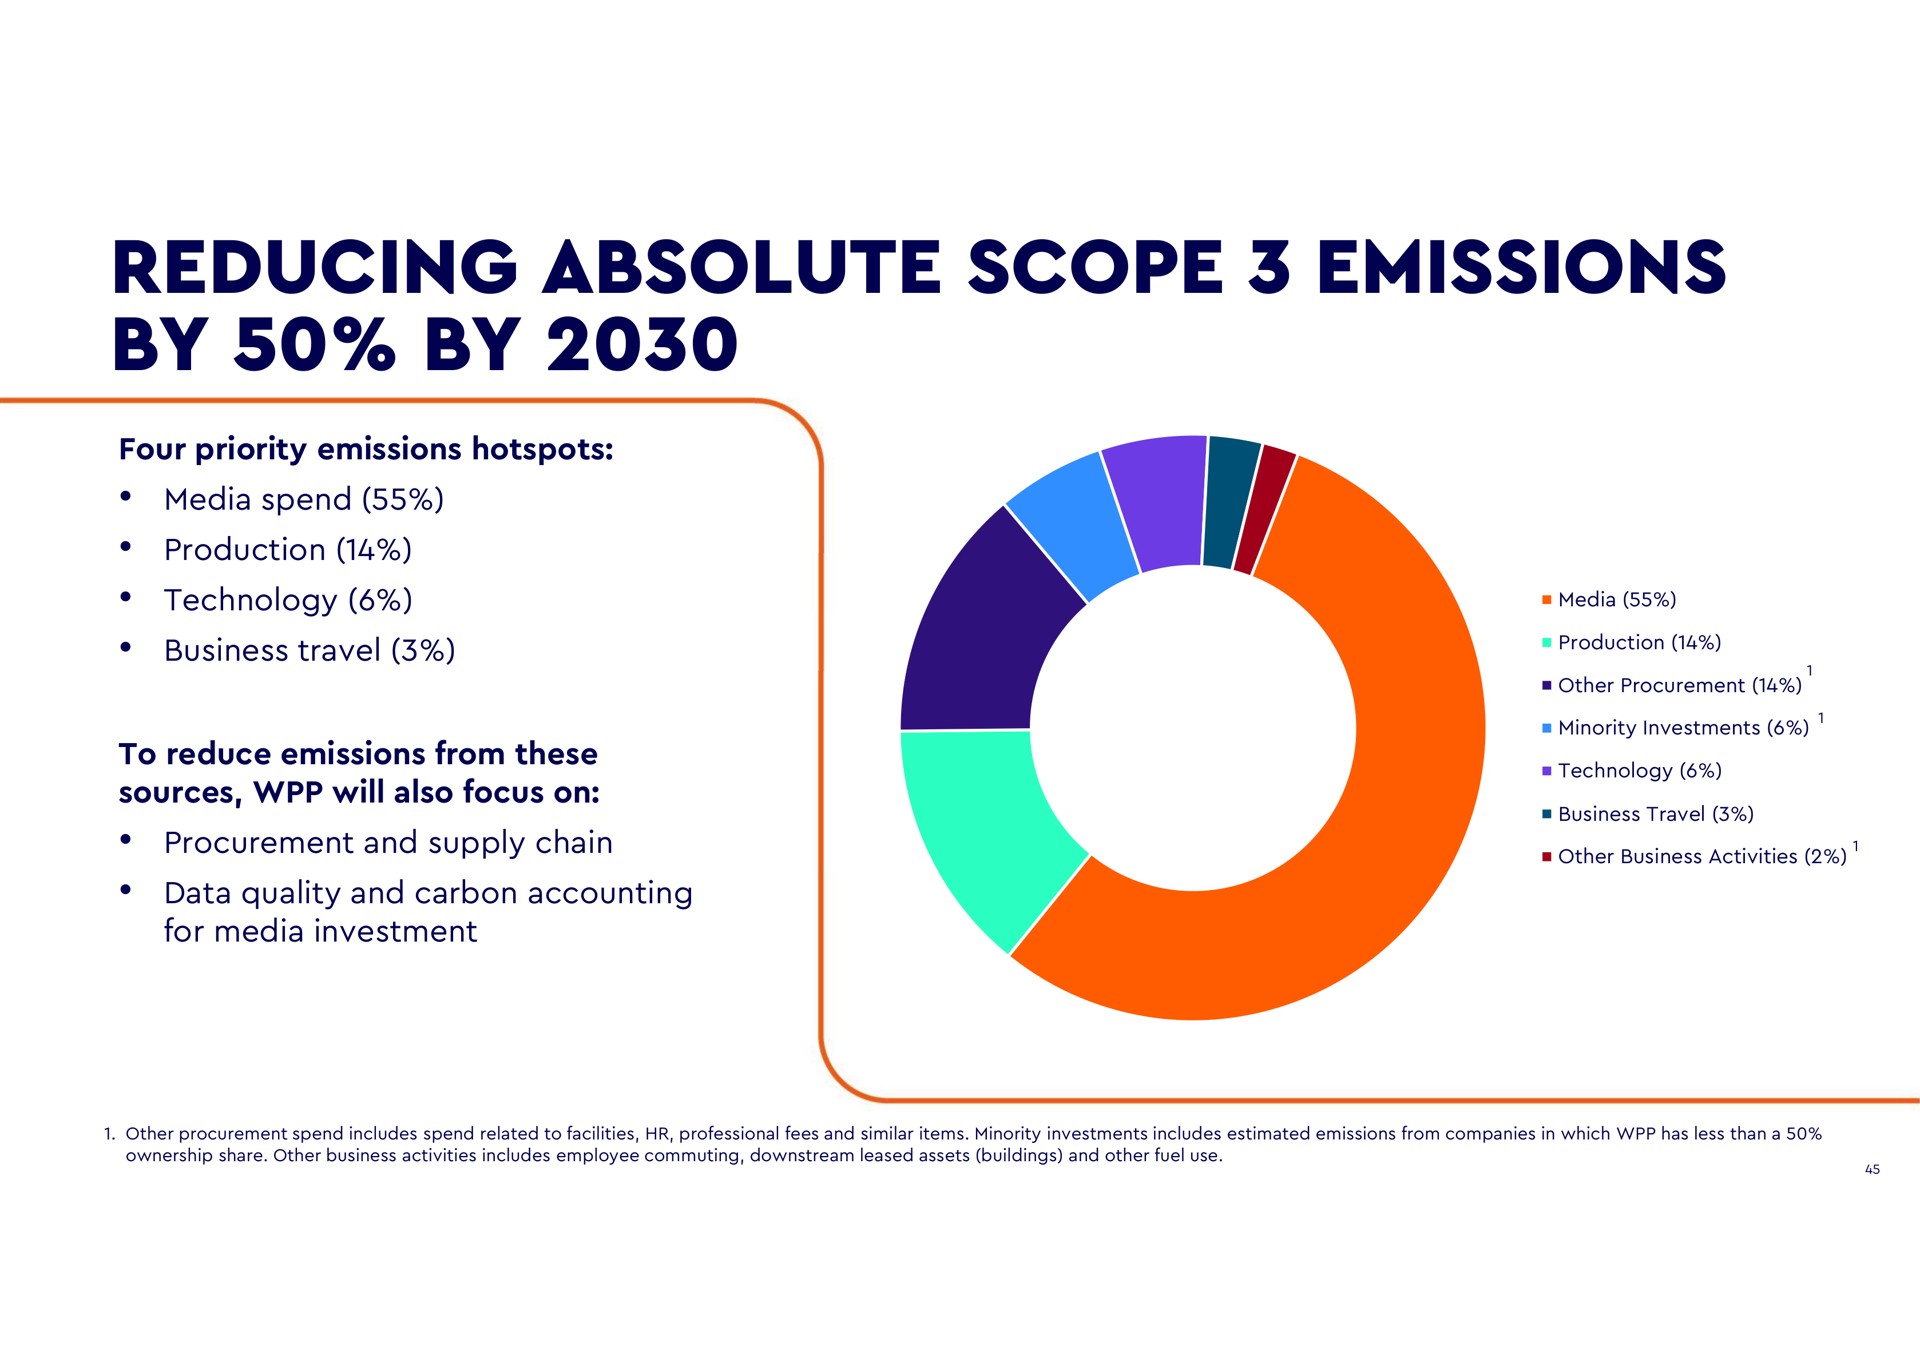 reducing absolute scope emissions by by four priority media spend production technology business travel to reduce from these sources will also focus on procurement and supply chain data quality and carbon accounting for media investment media production other procurement minority investments technology business travel other business activities other procurement spend includes spend related to facilities professional fees and similar items minority investments includes estimated from companies in which has less than a ownership share other business activities includes employee commuting downstream leased assets buildings and other fuel use | WPP